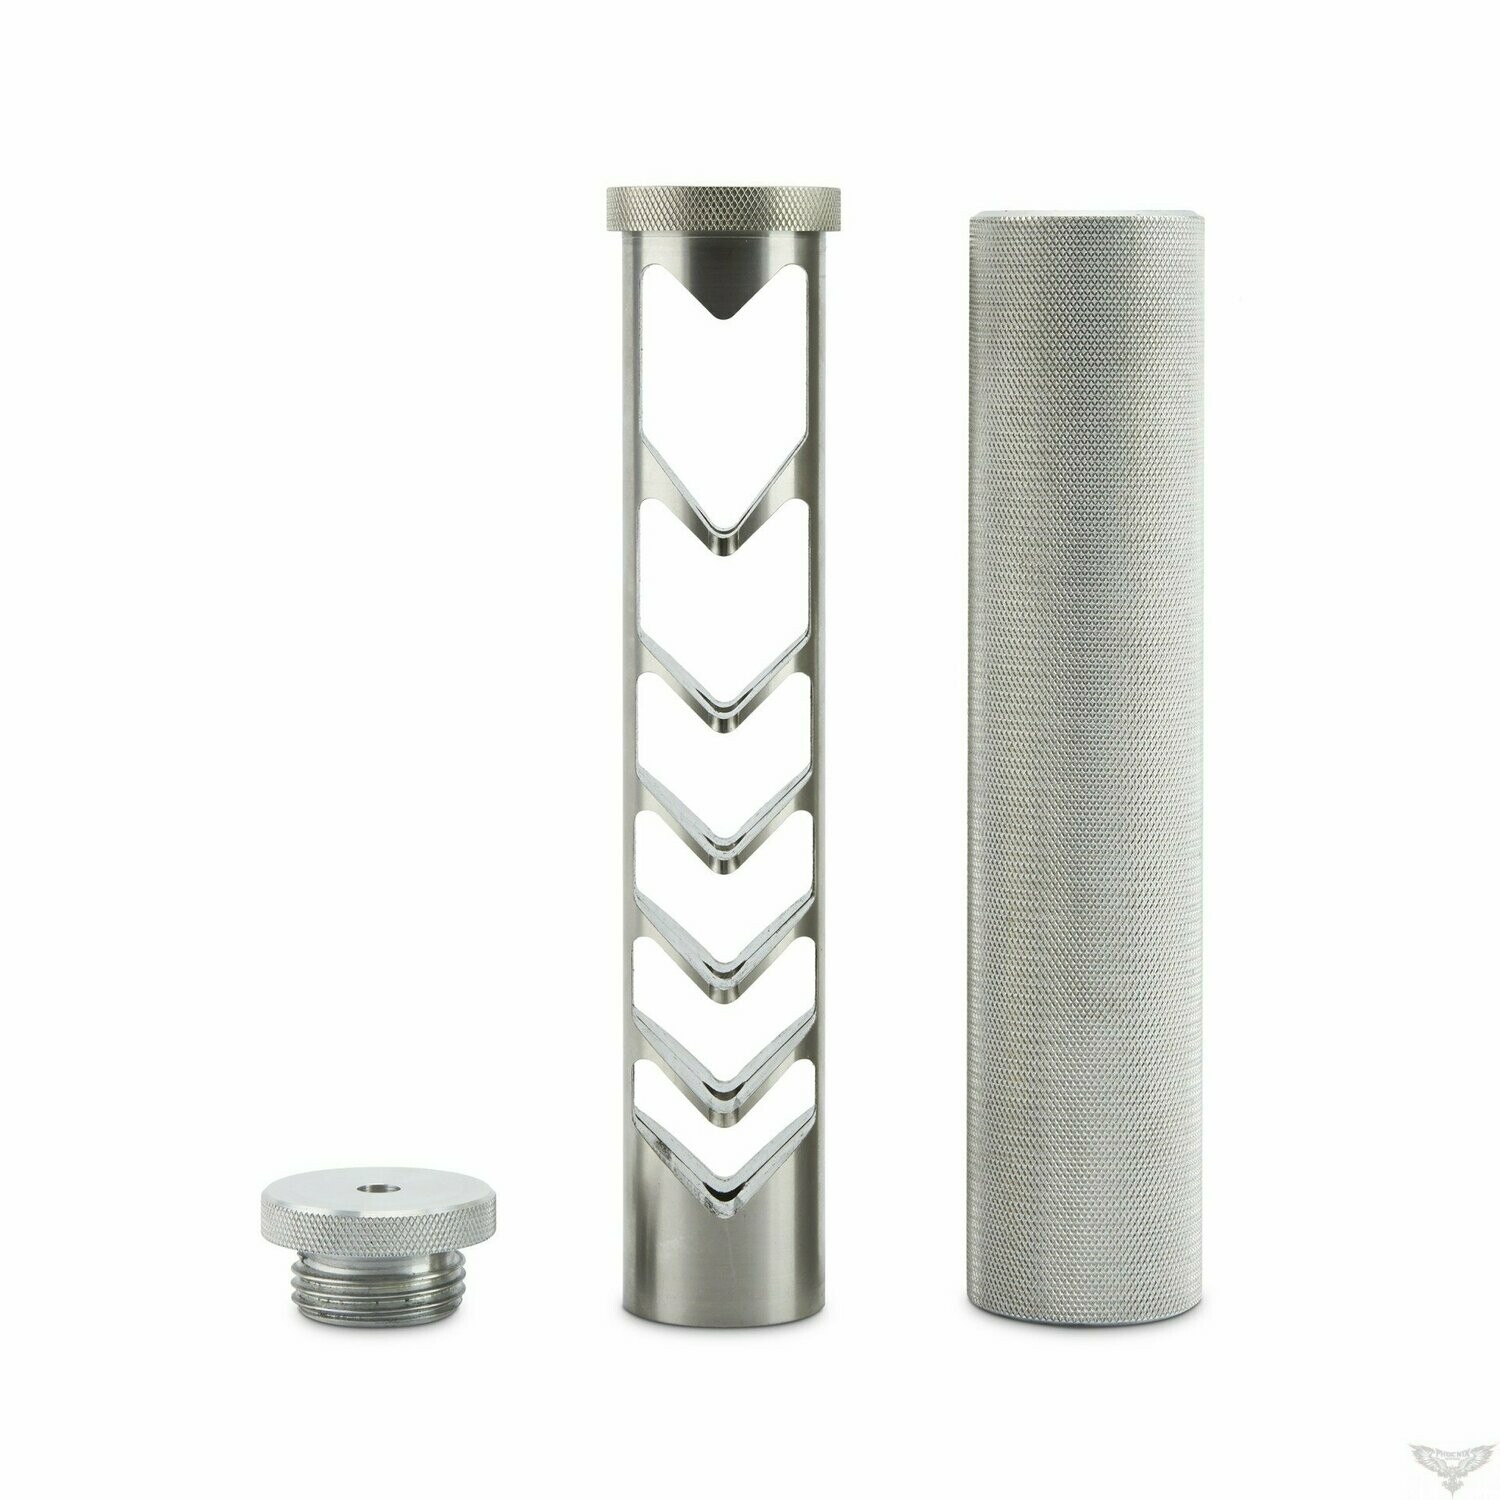 .308 / 7.62 Rifle Suppressors, Suppressor Material: 1.5"OD x 8" Stainless Core